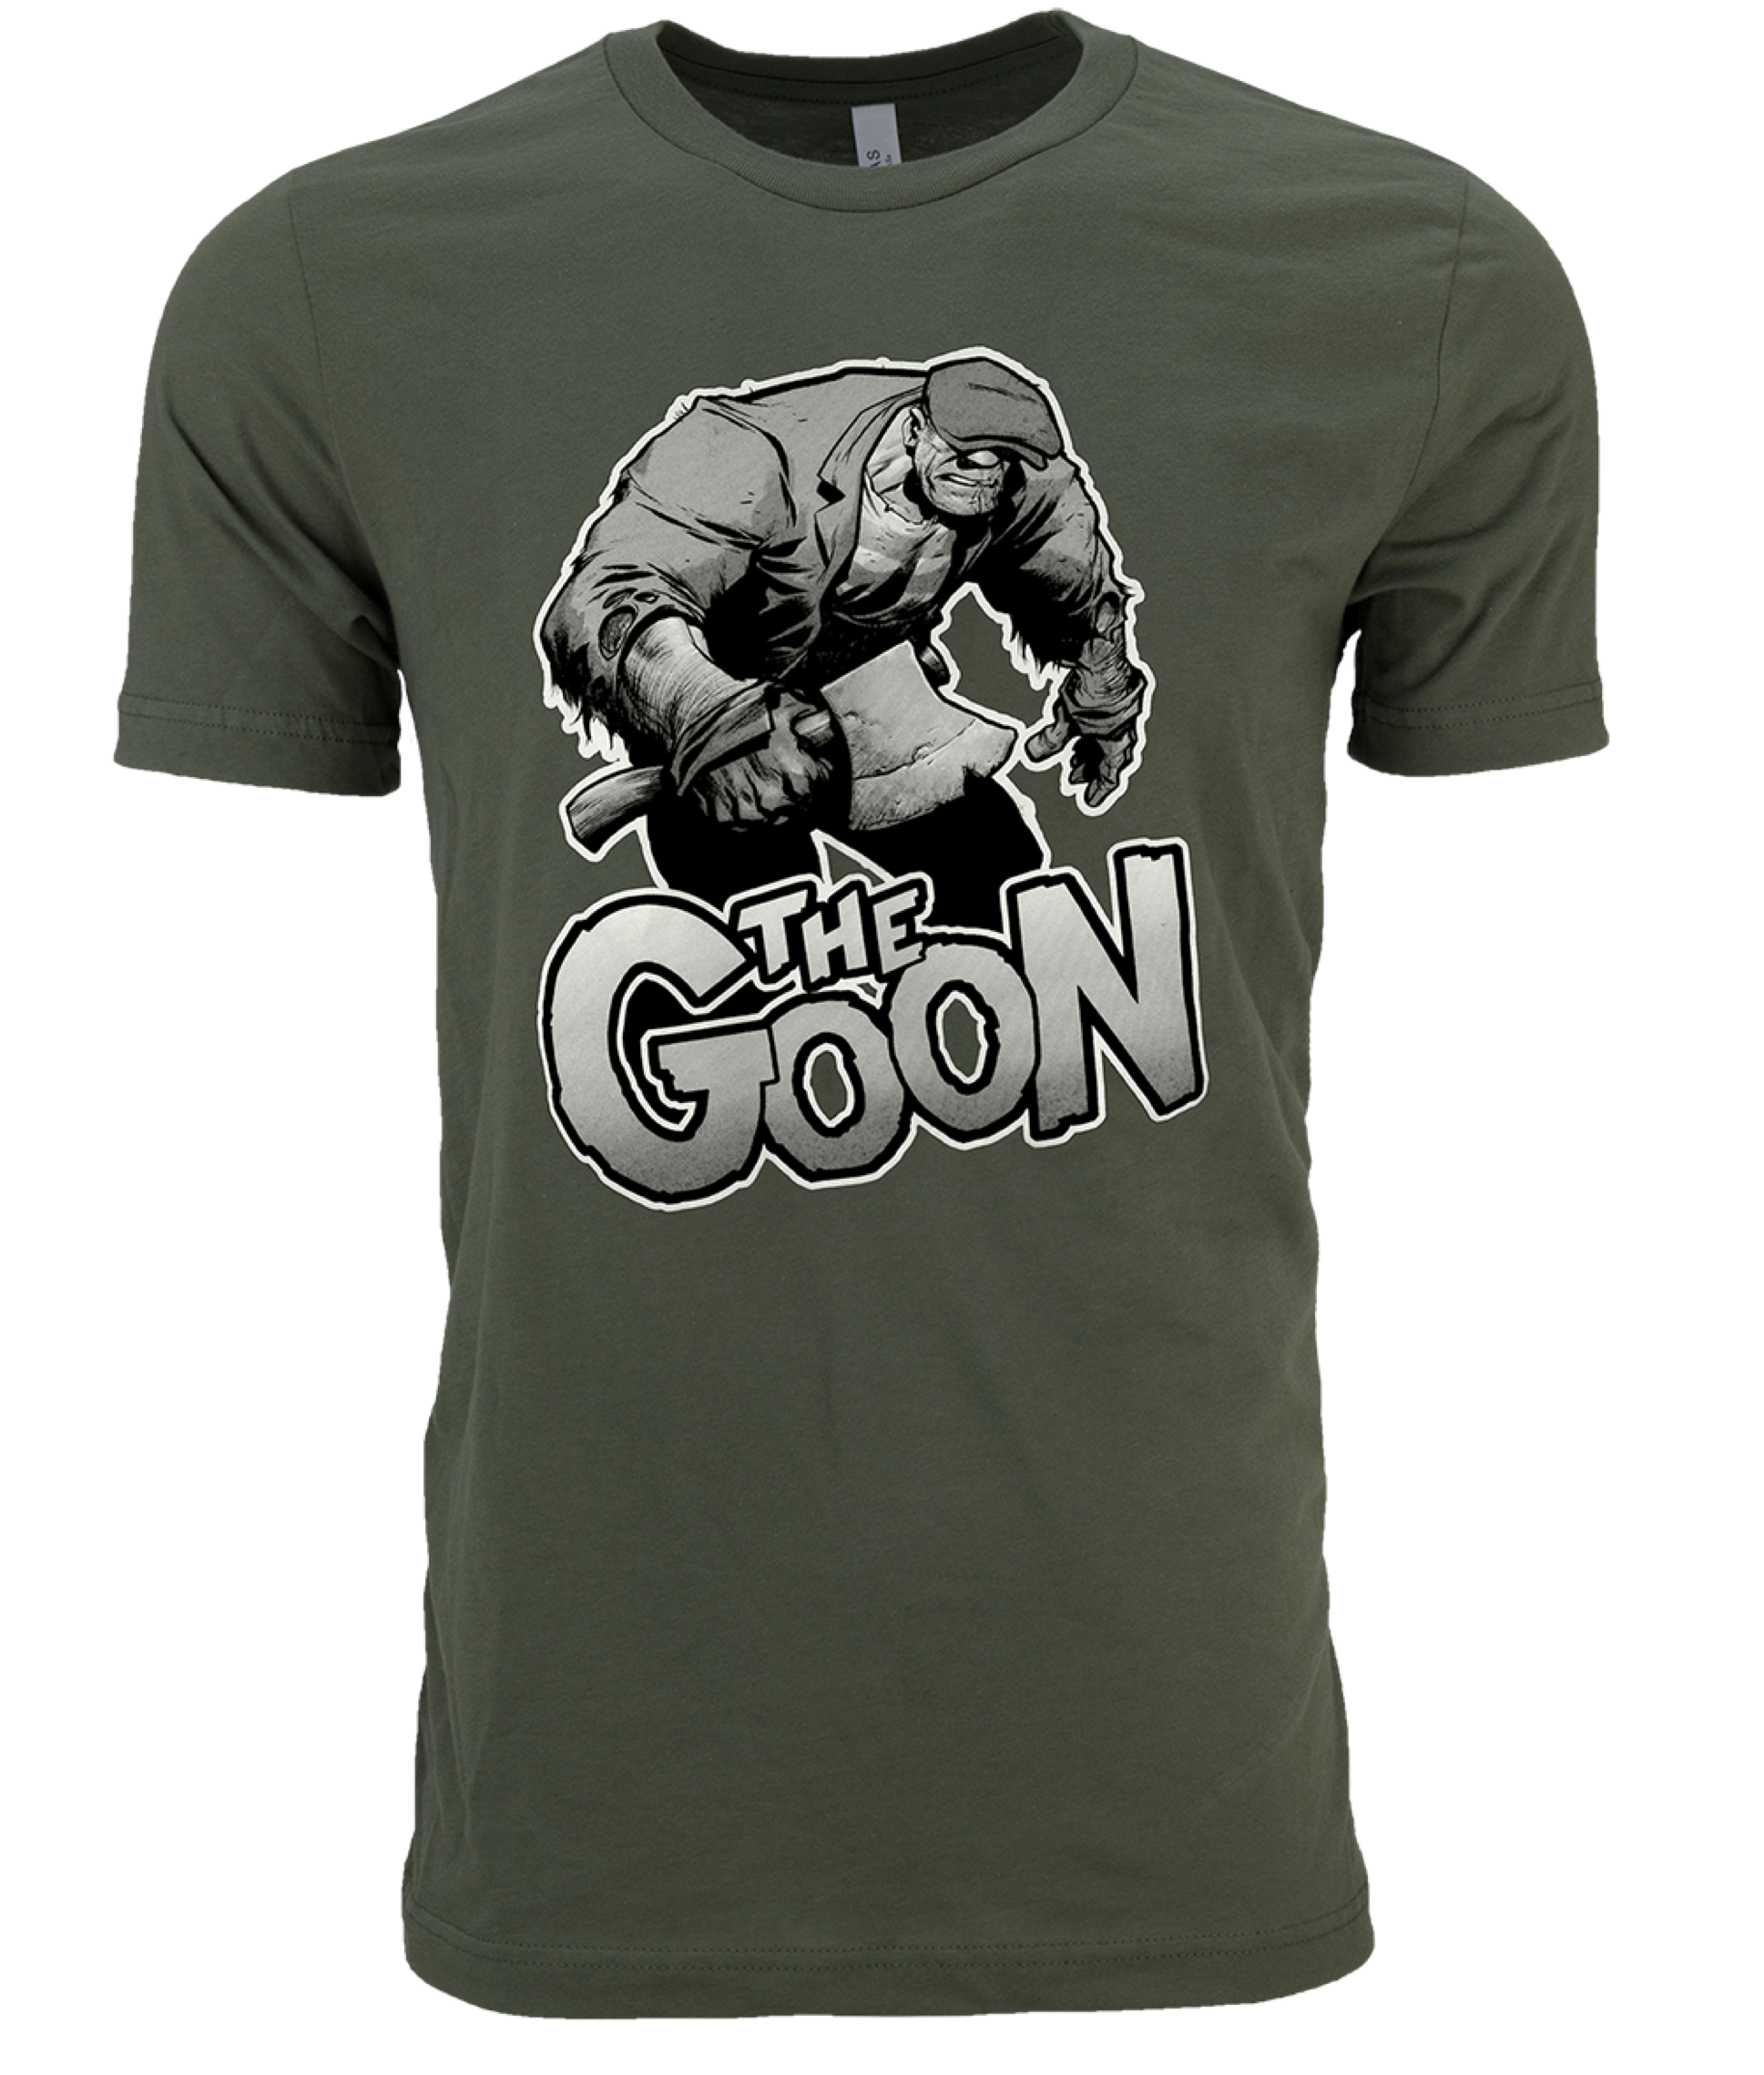 T-shirt of The Goon